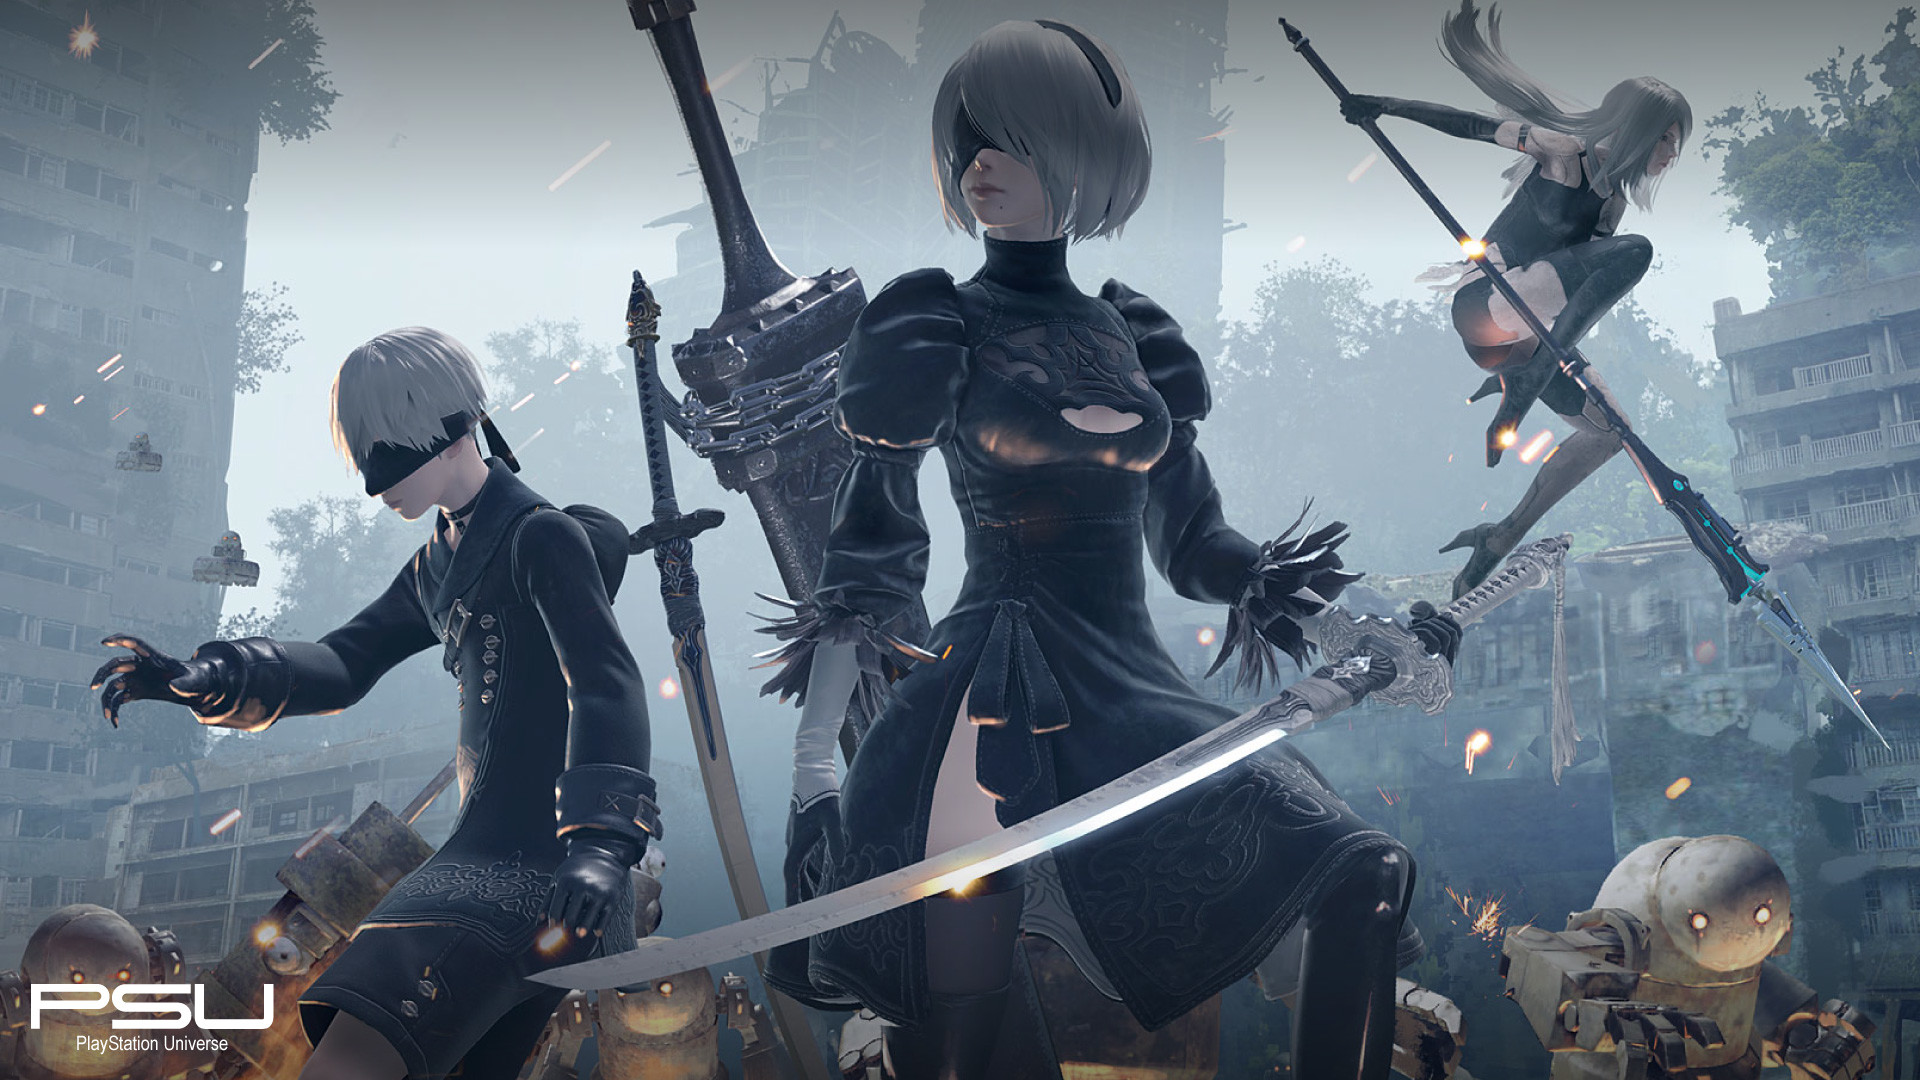 1920x1080 Nier Automata features iconic imagery, and this wallpaper captures the  magic of one of 2017's best games.